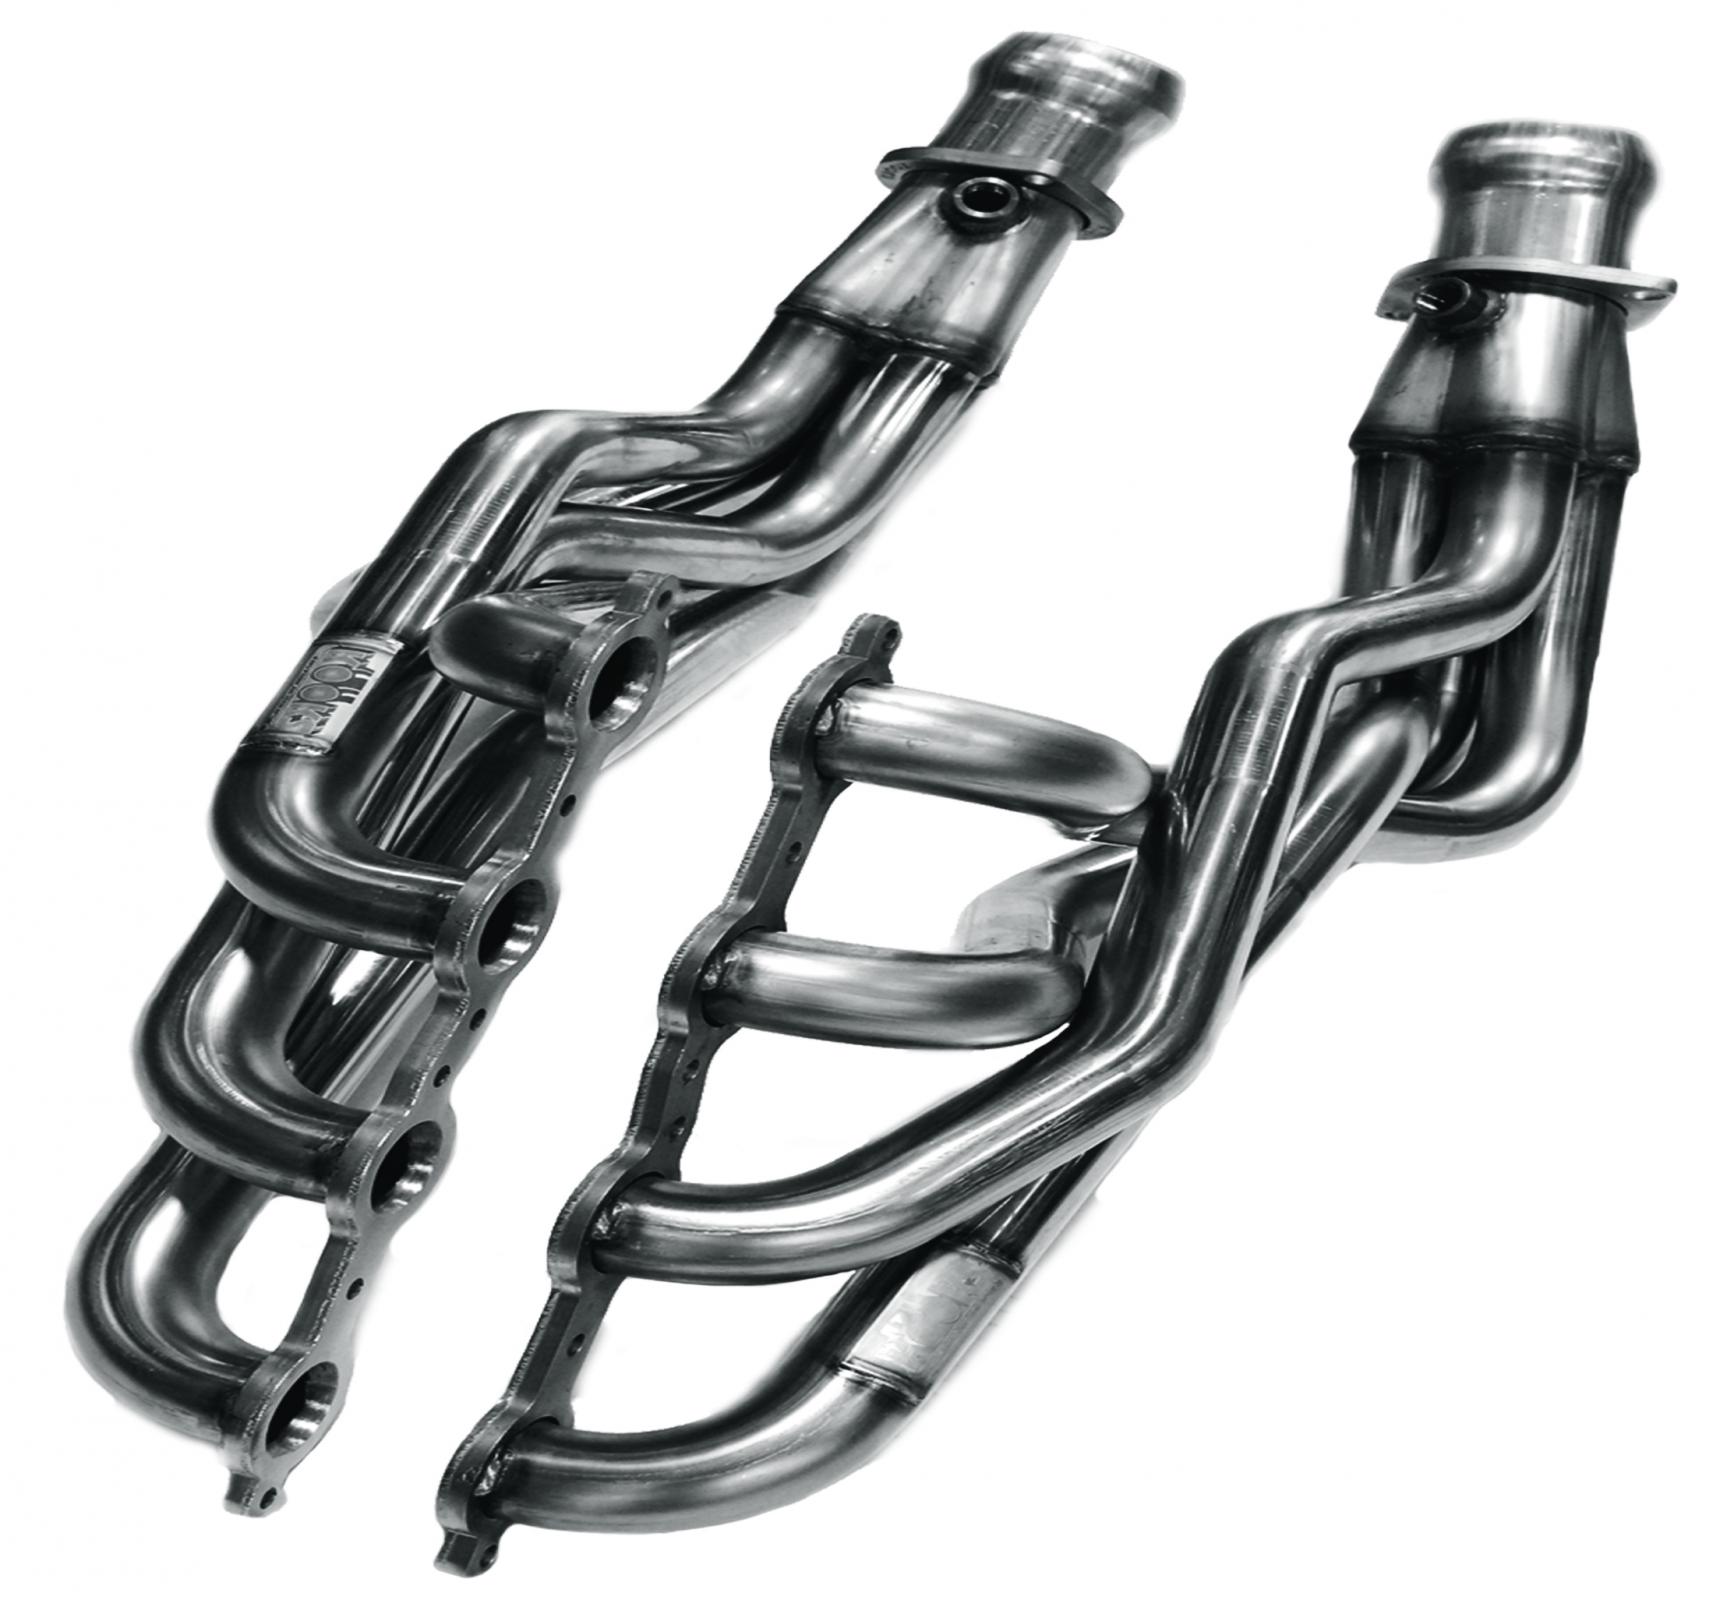 Stainless Steel Headers 1.875 x 3" Long Tube w/O2 Extension Harness Kit -2 Front/2 Back